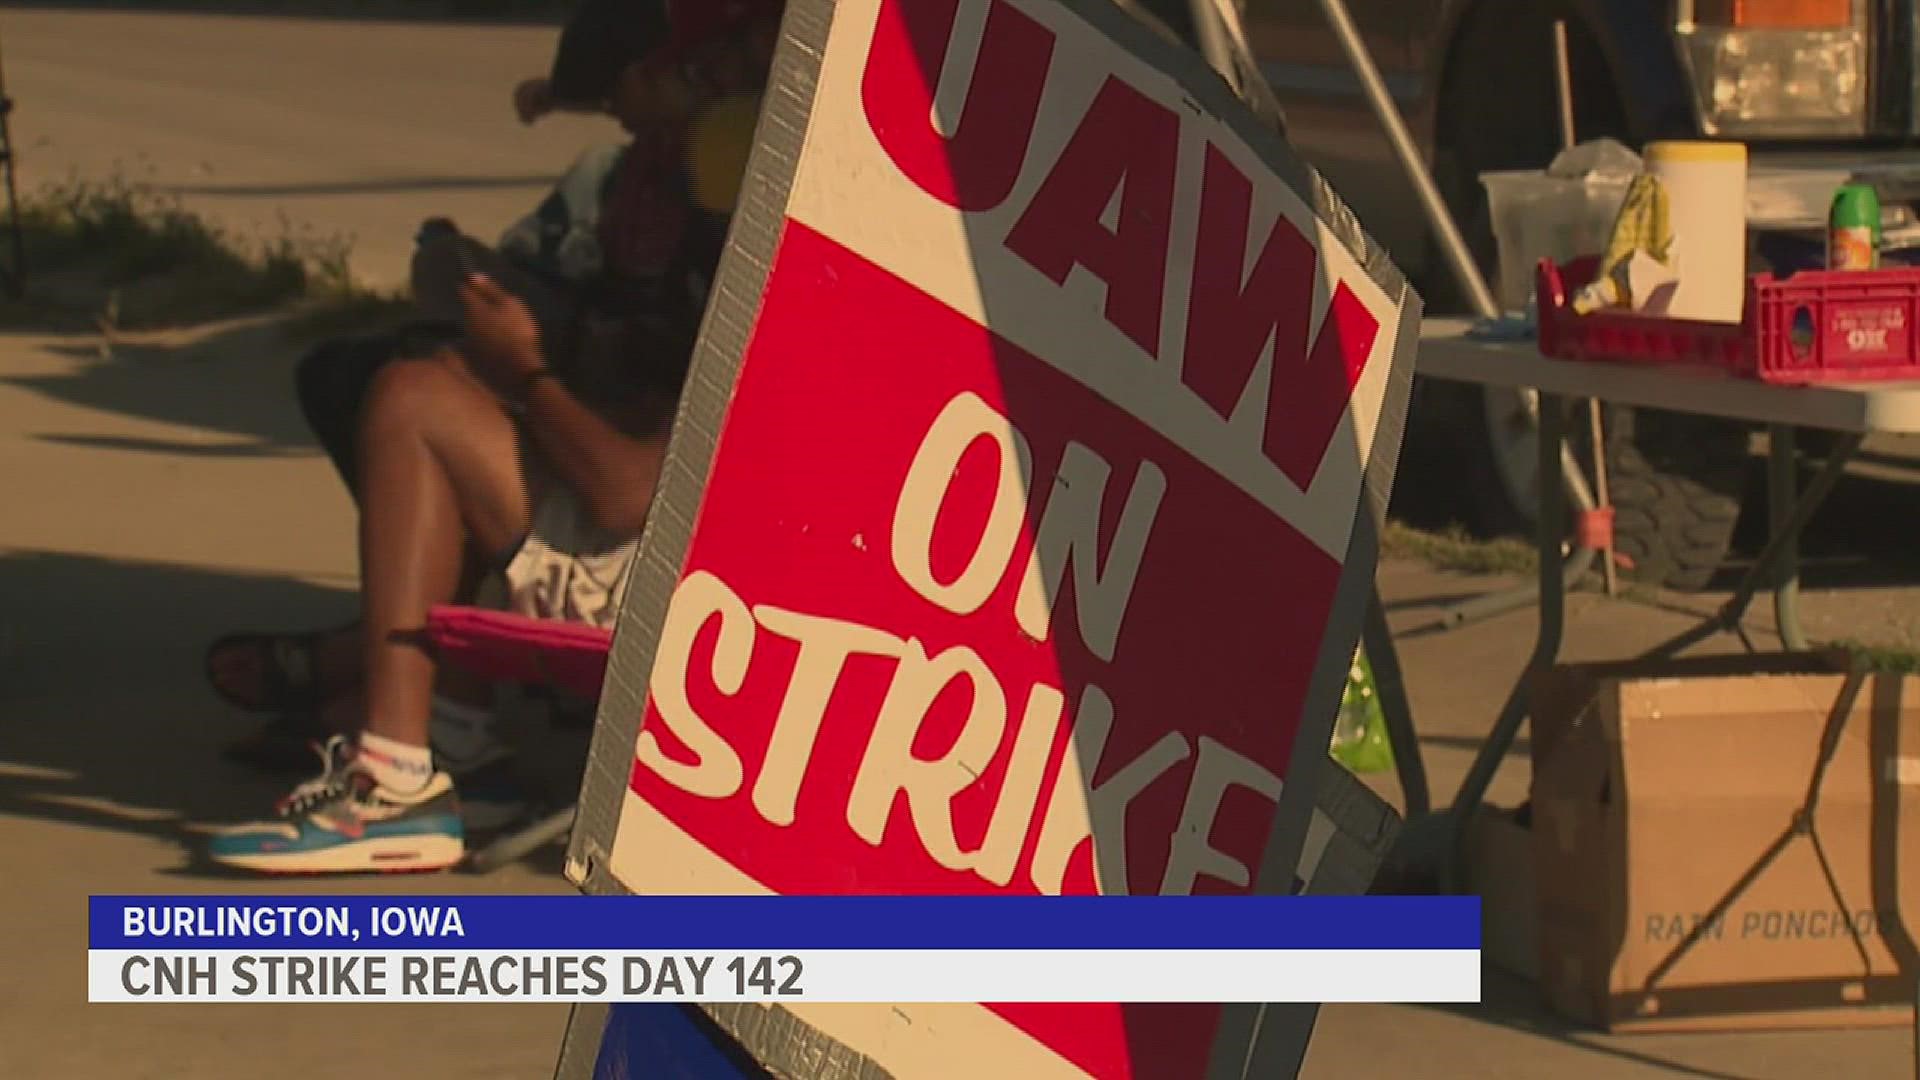 More than 1,000 members of the United Auto Workers union at CNH plants in Burlington and Wisconsin have been on strike since May 2.